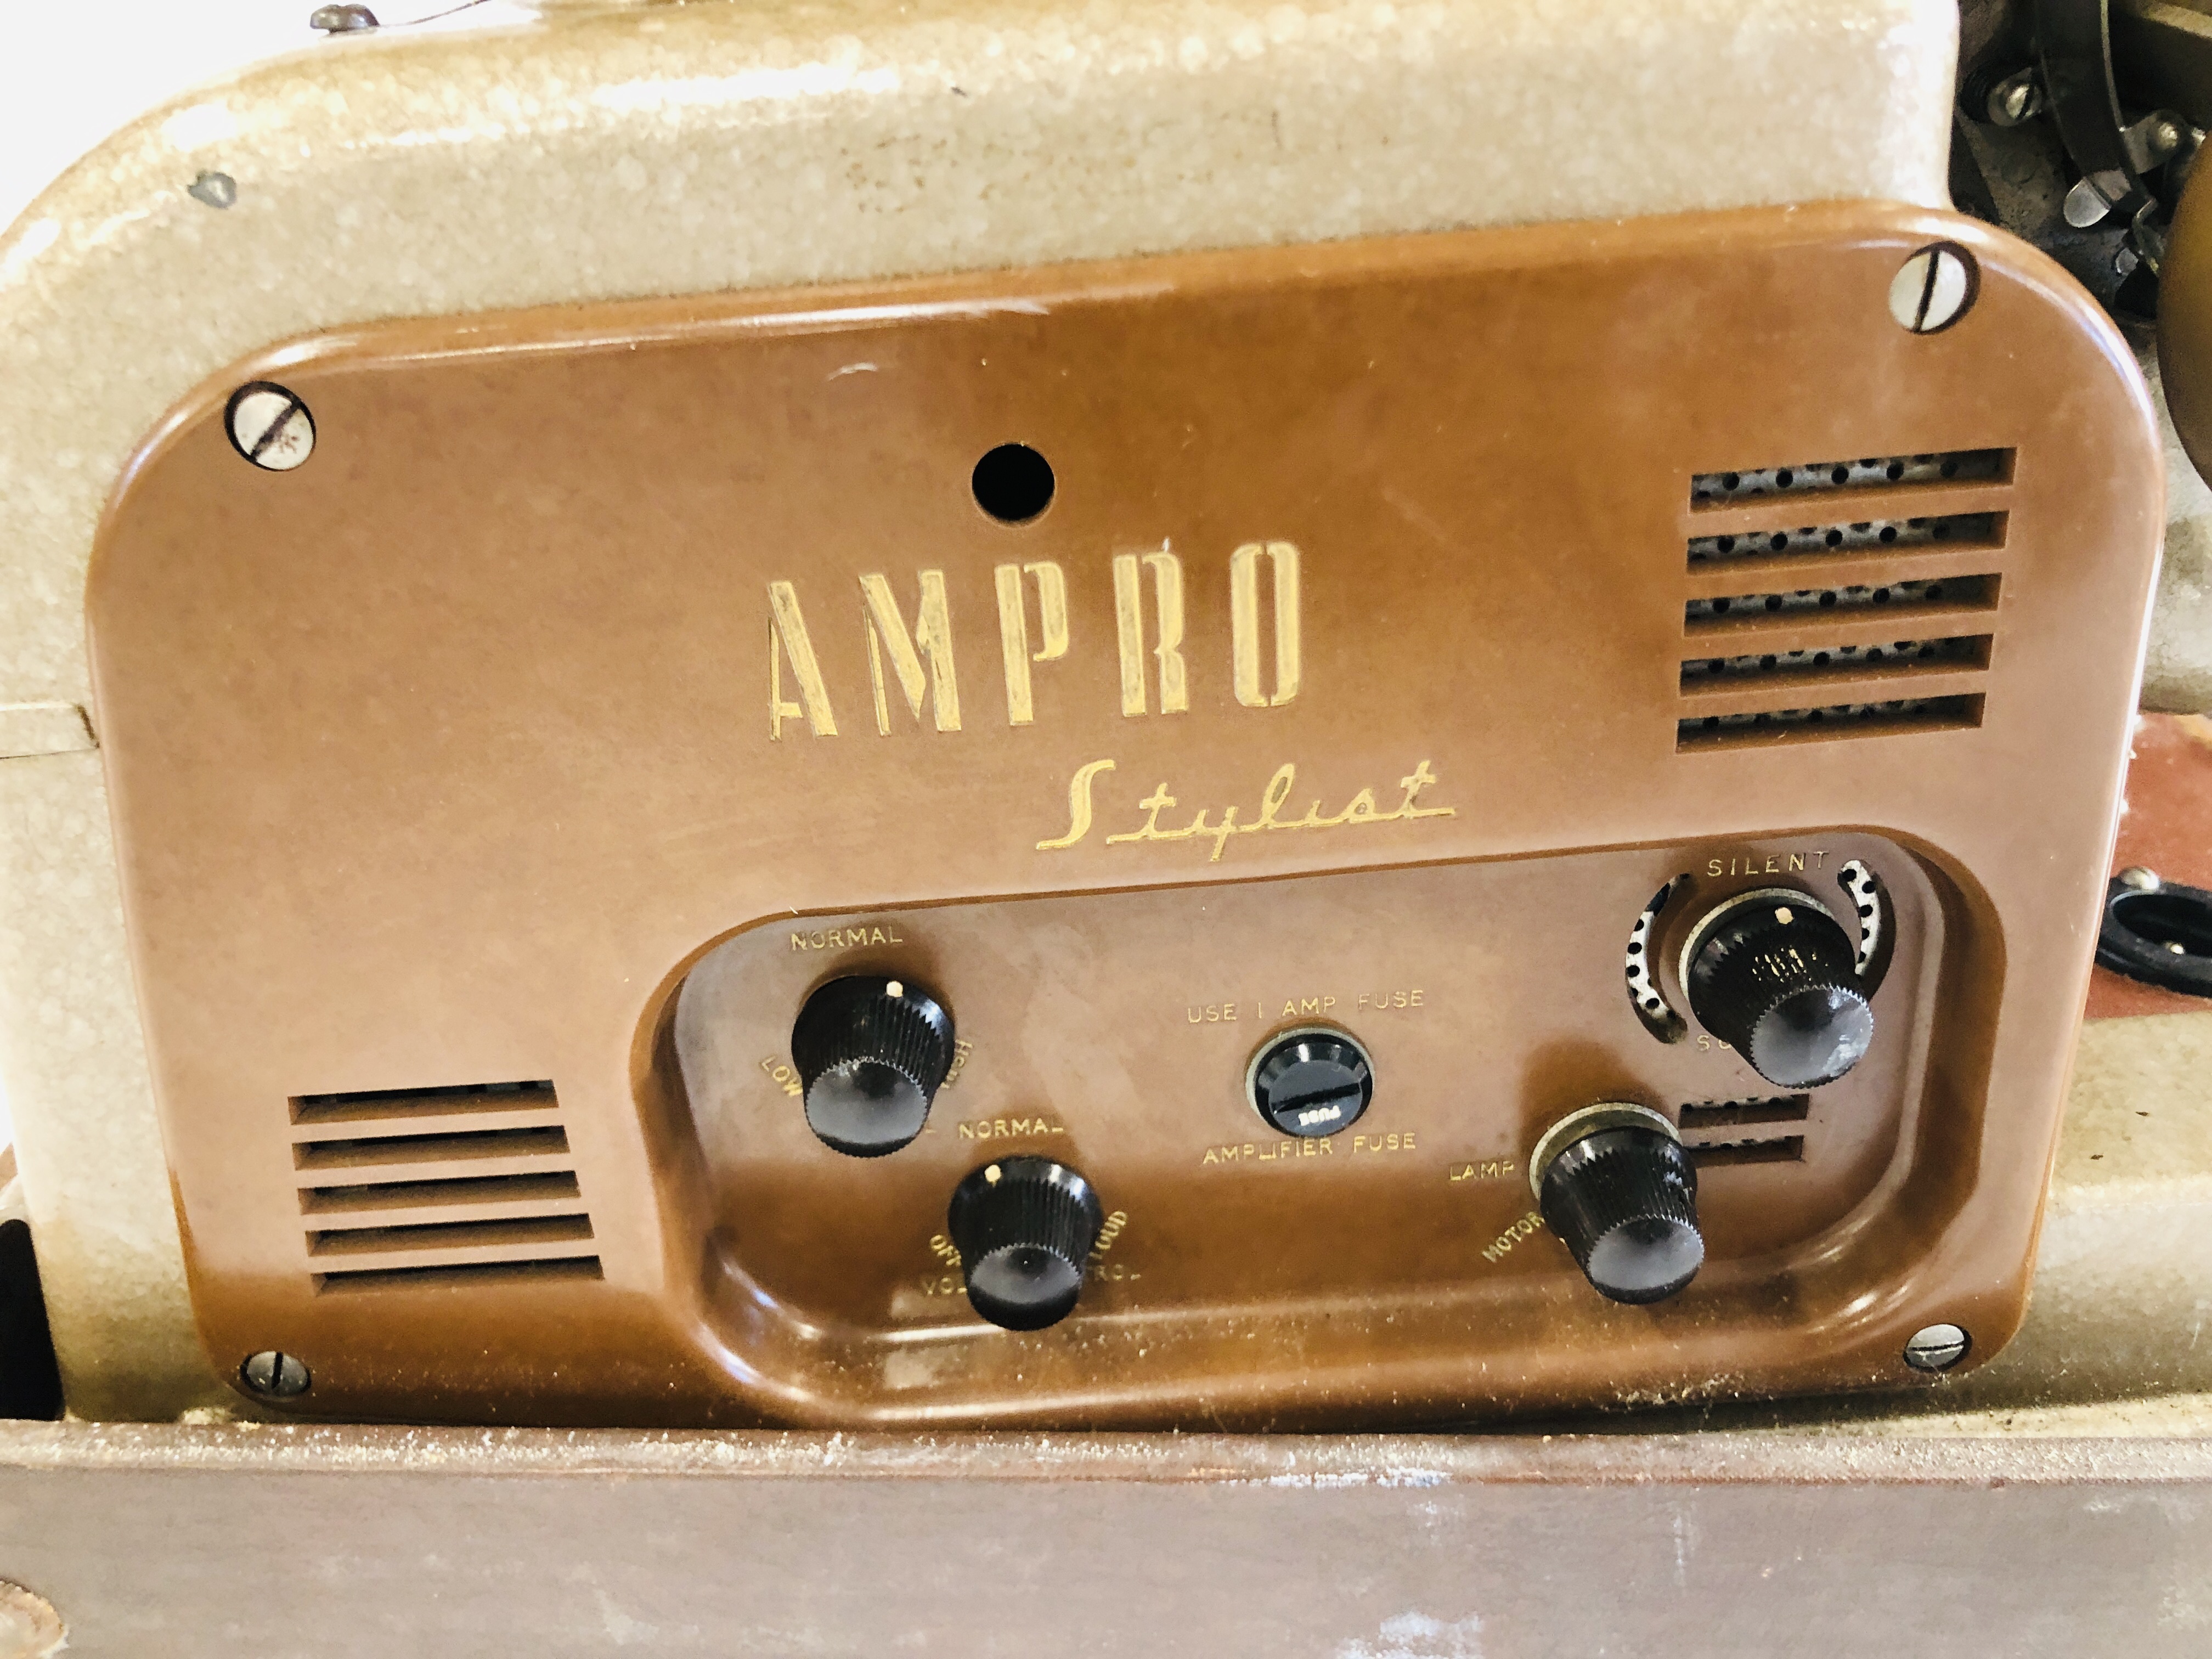 A CASED AMPRO STYLIST PROJECTOR - COLLECTORS ITEM ONLY - SOLD AS SEEN. - Image 3 of 6